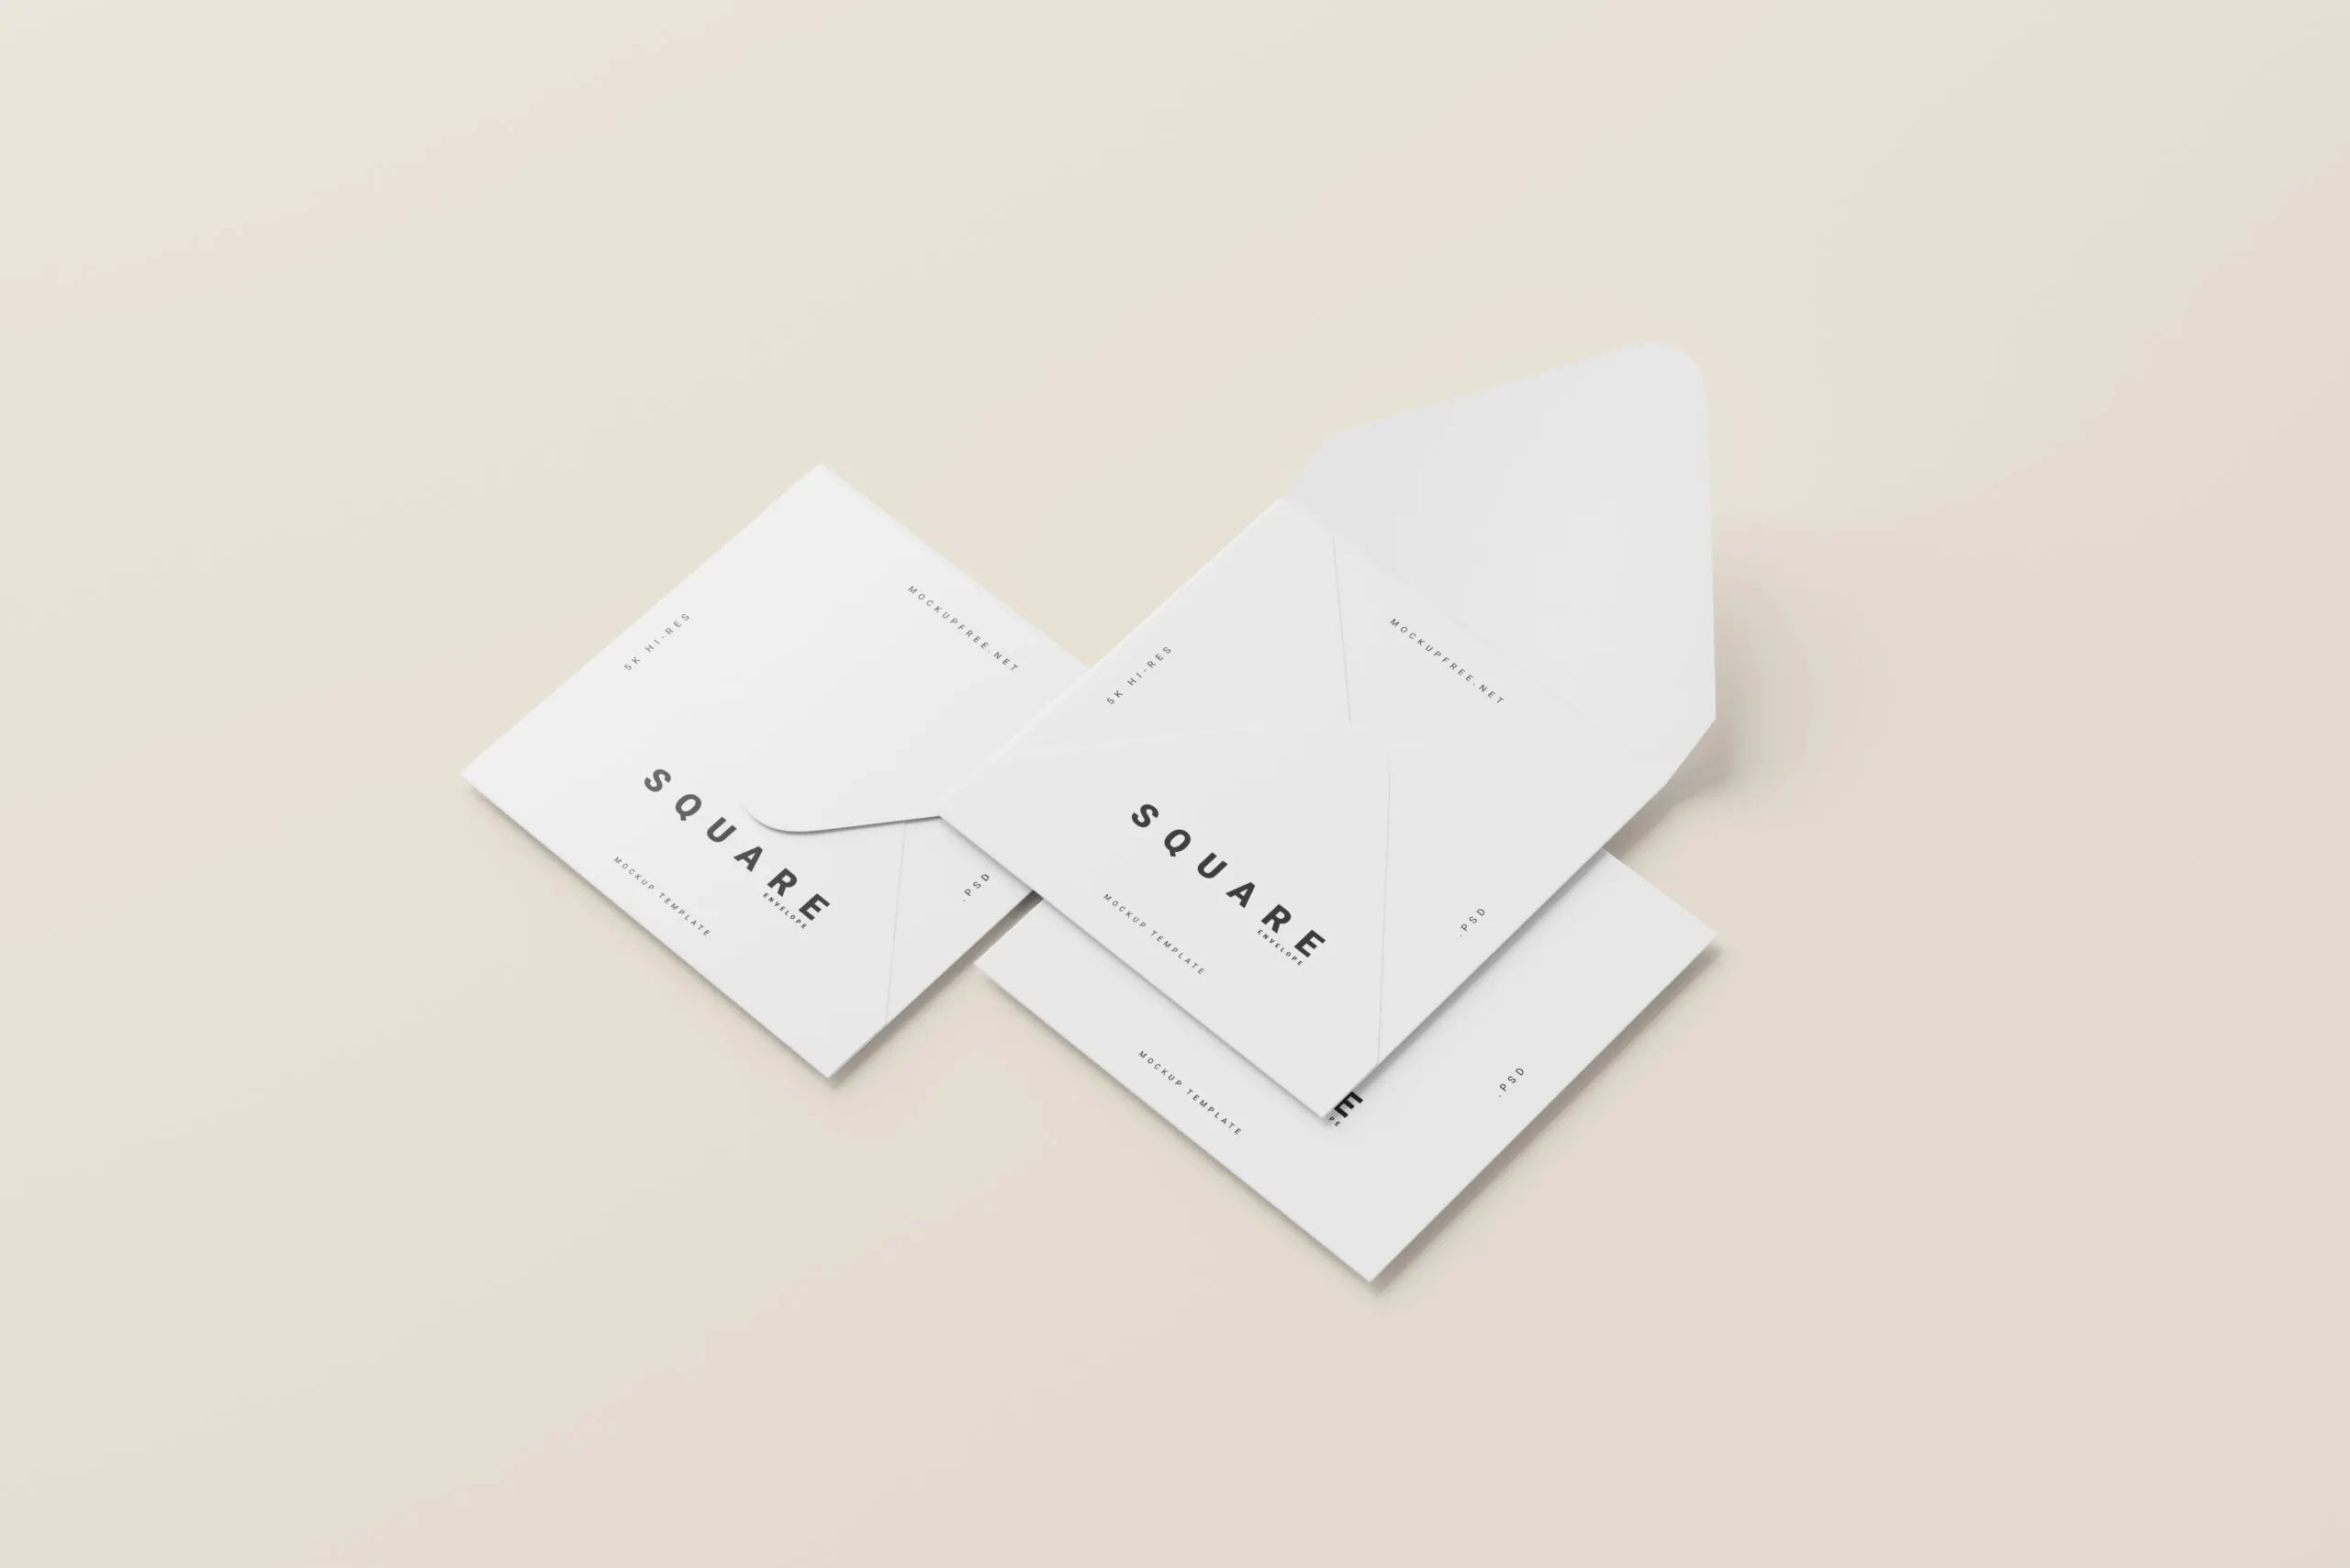 5 Square Envelopes Mockups in Perspective Visions FREE PSD